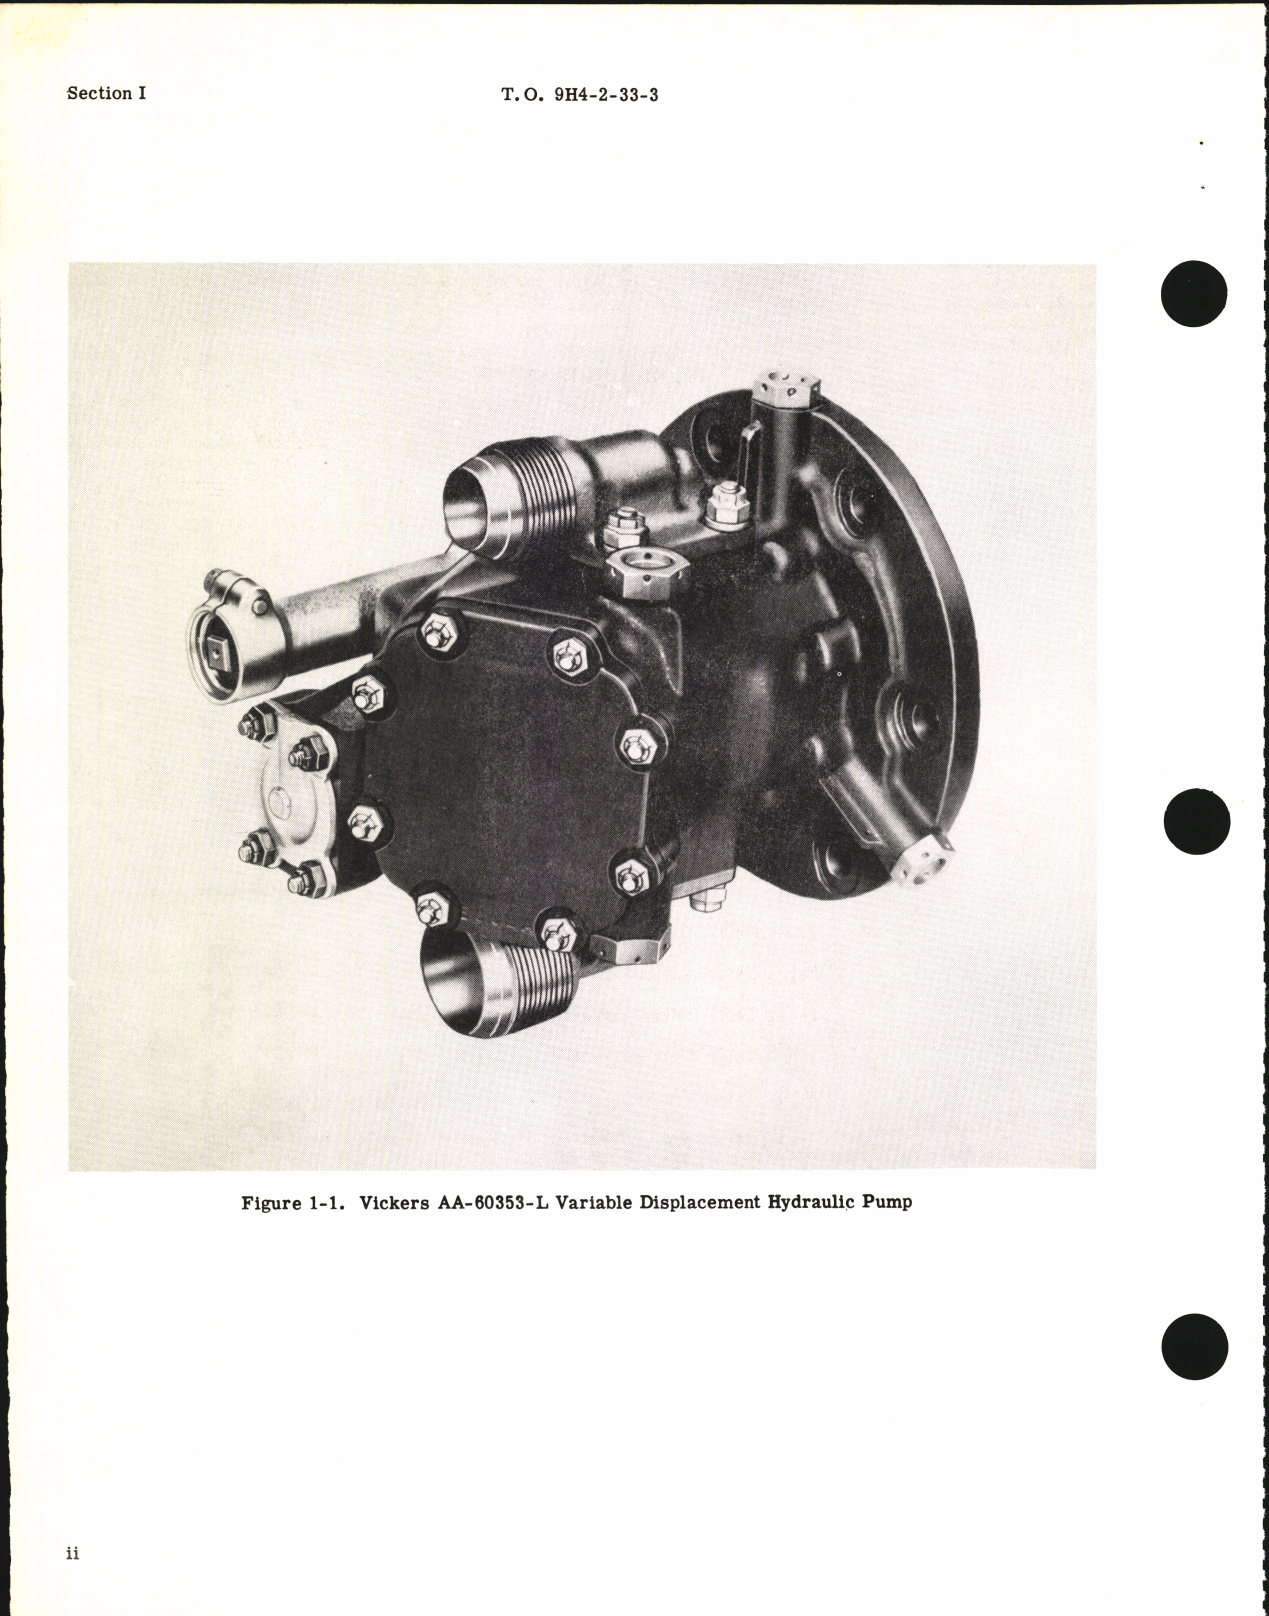 Sample page 4 from AirCorps Library document: Overhaul Instructions for Variable Displacement Hydraulic Pump AA-60300 Series